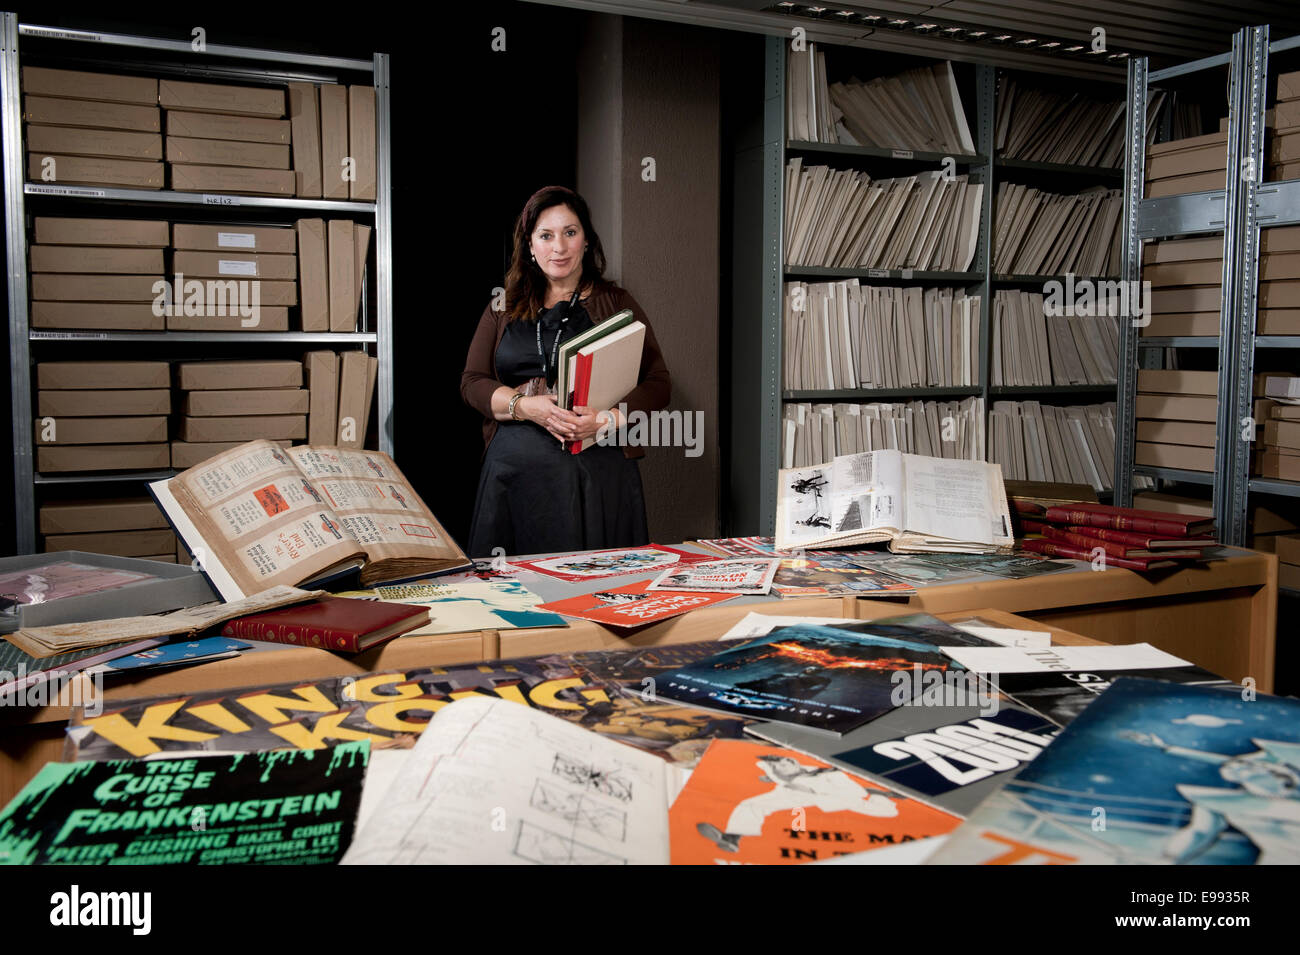 female member of staff at the BFI archive with storage shelves filled with archival boxes holding all kinds of film memorabilia Stock Photo